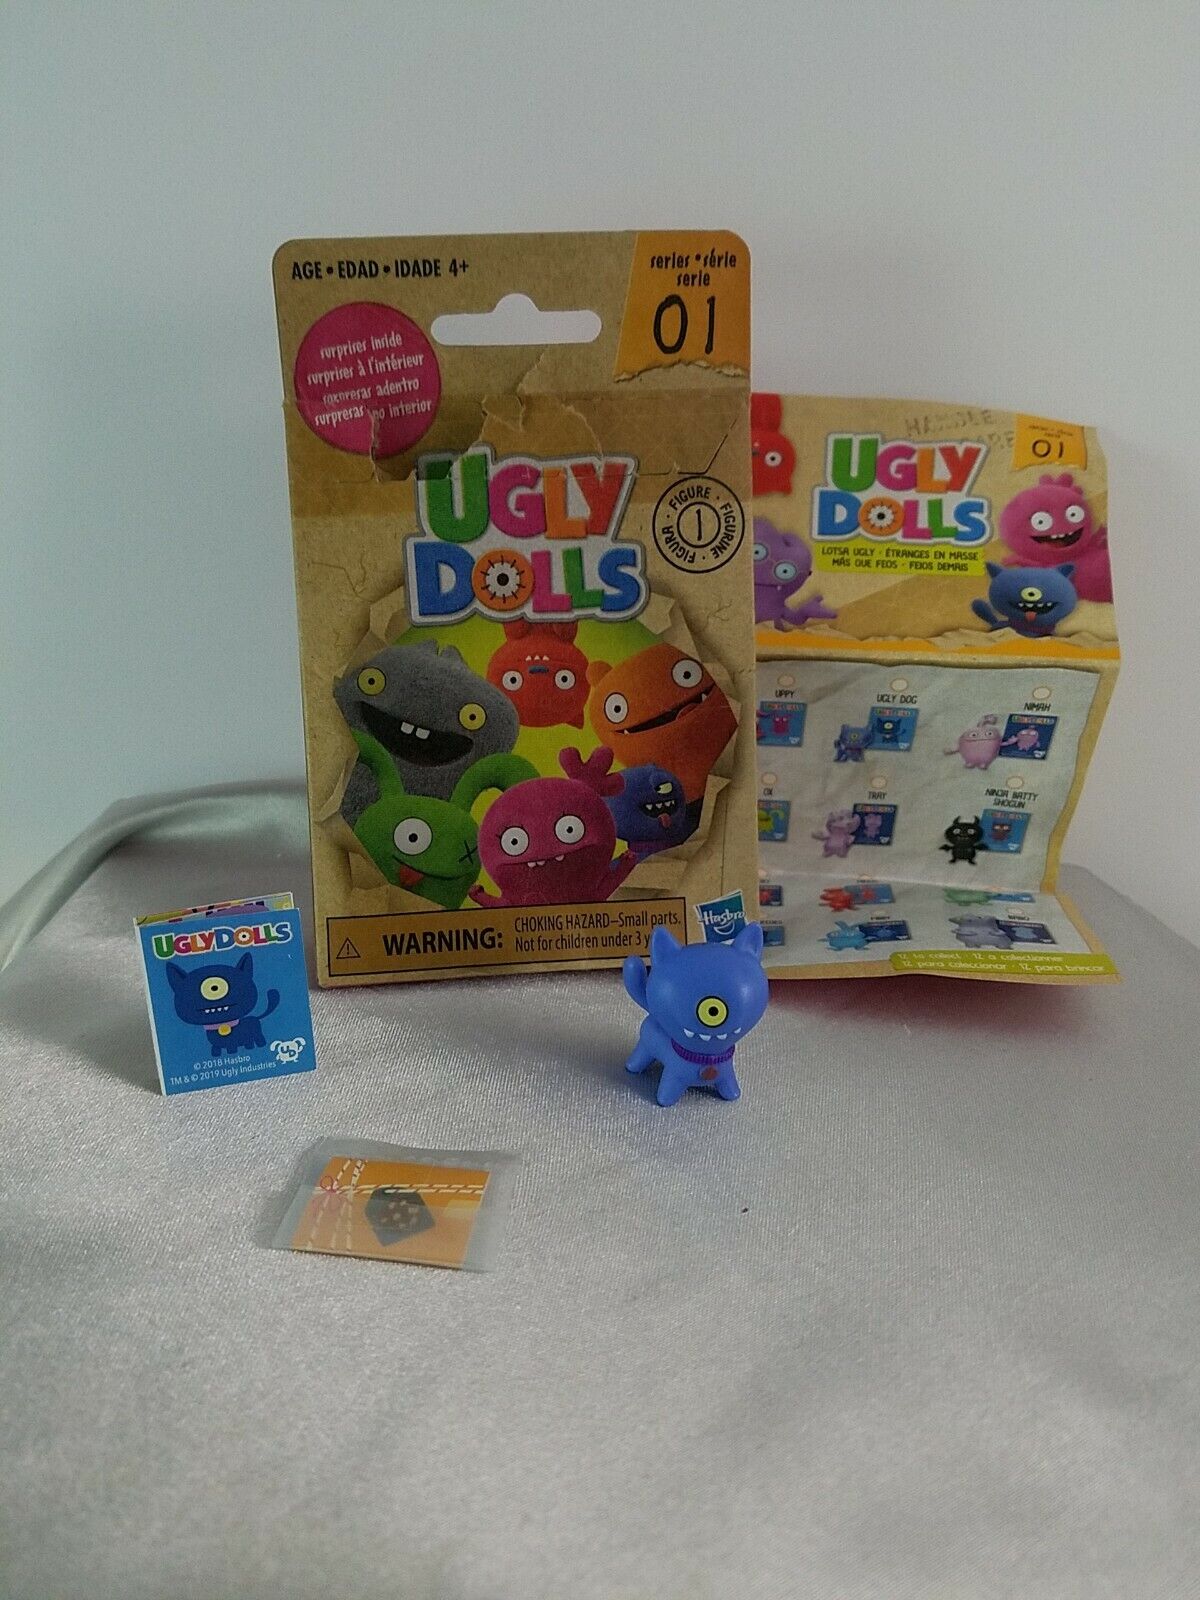 Hasbro Ugly Dolls Surprise Mystery Bag Series 1 Mini Toy Figurine “Ugly Dog”